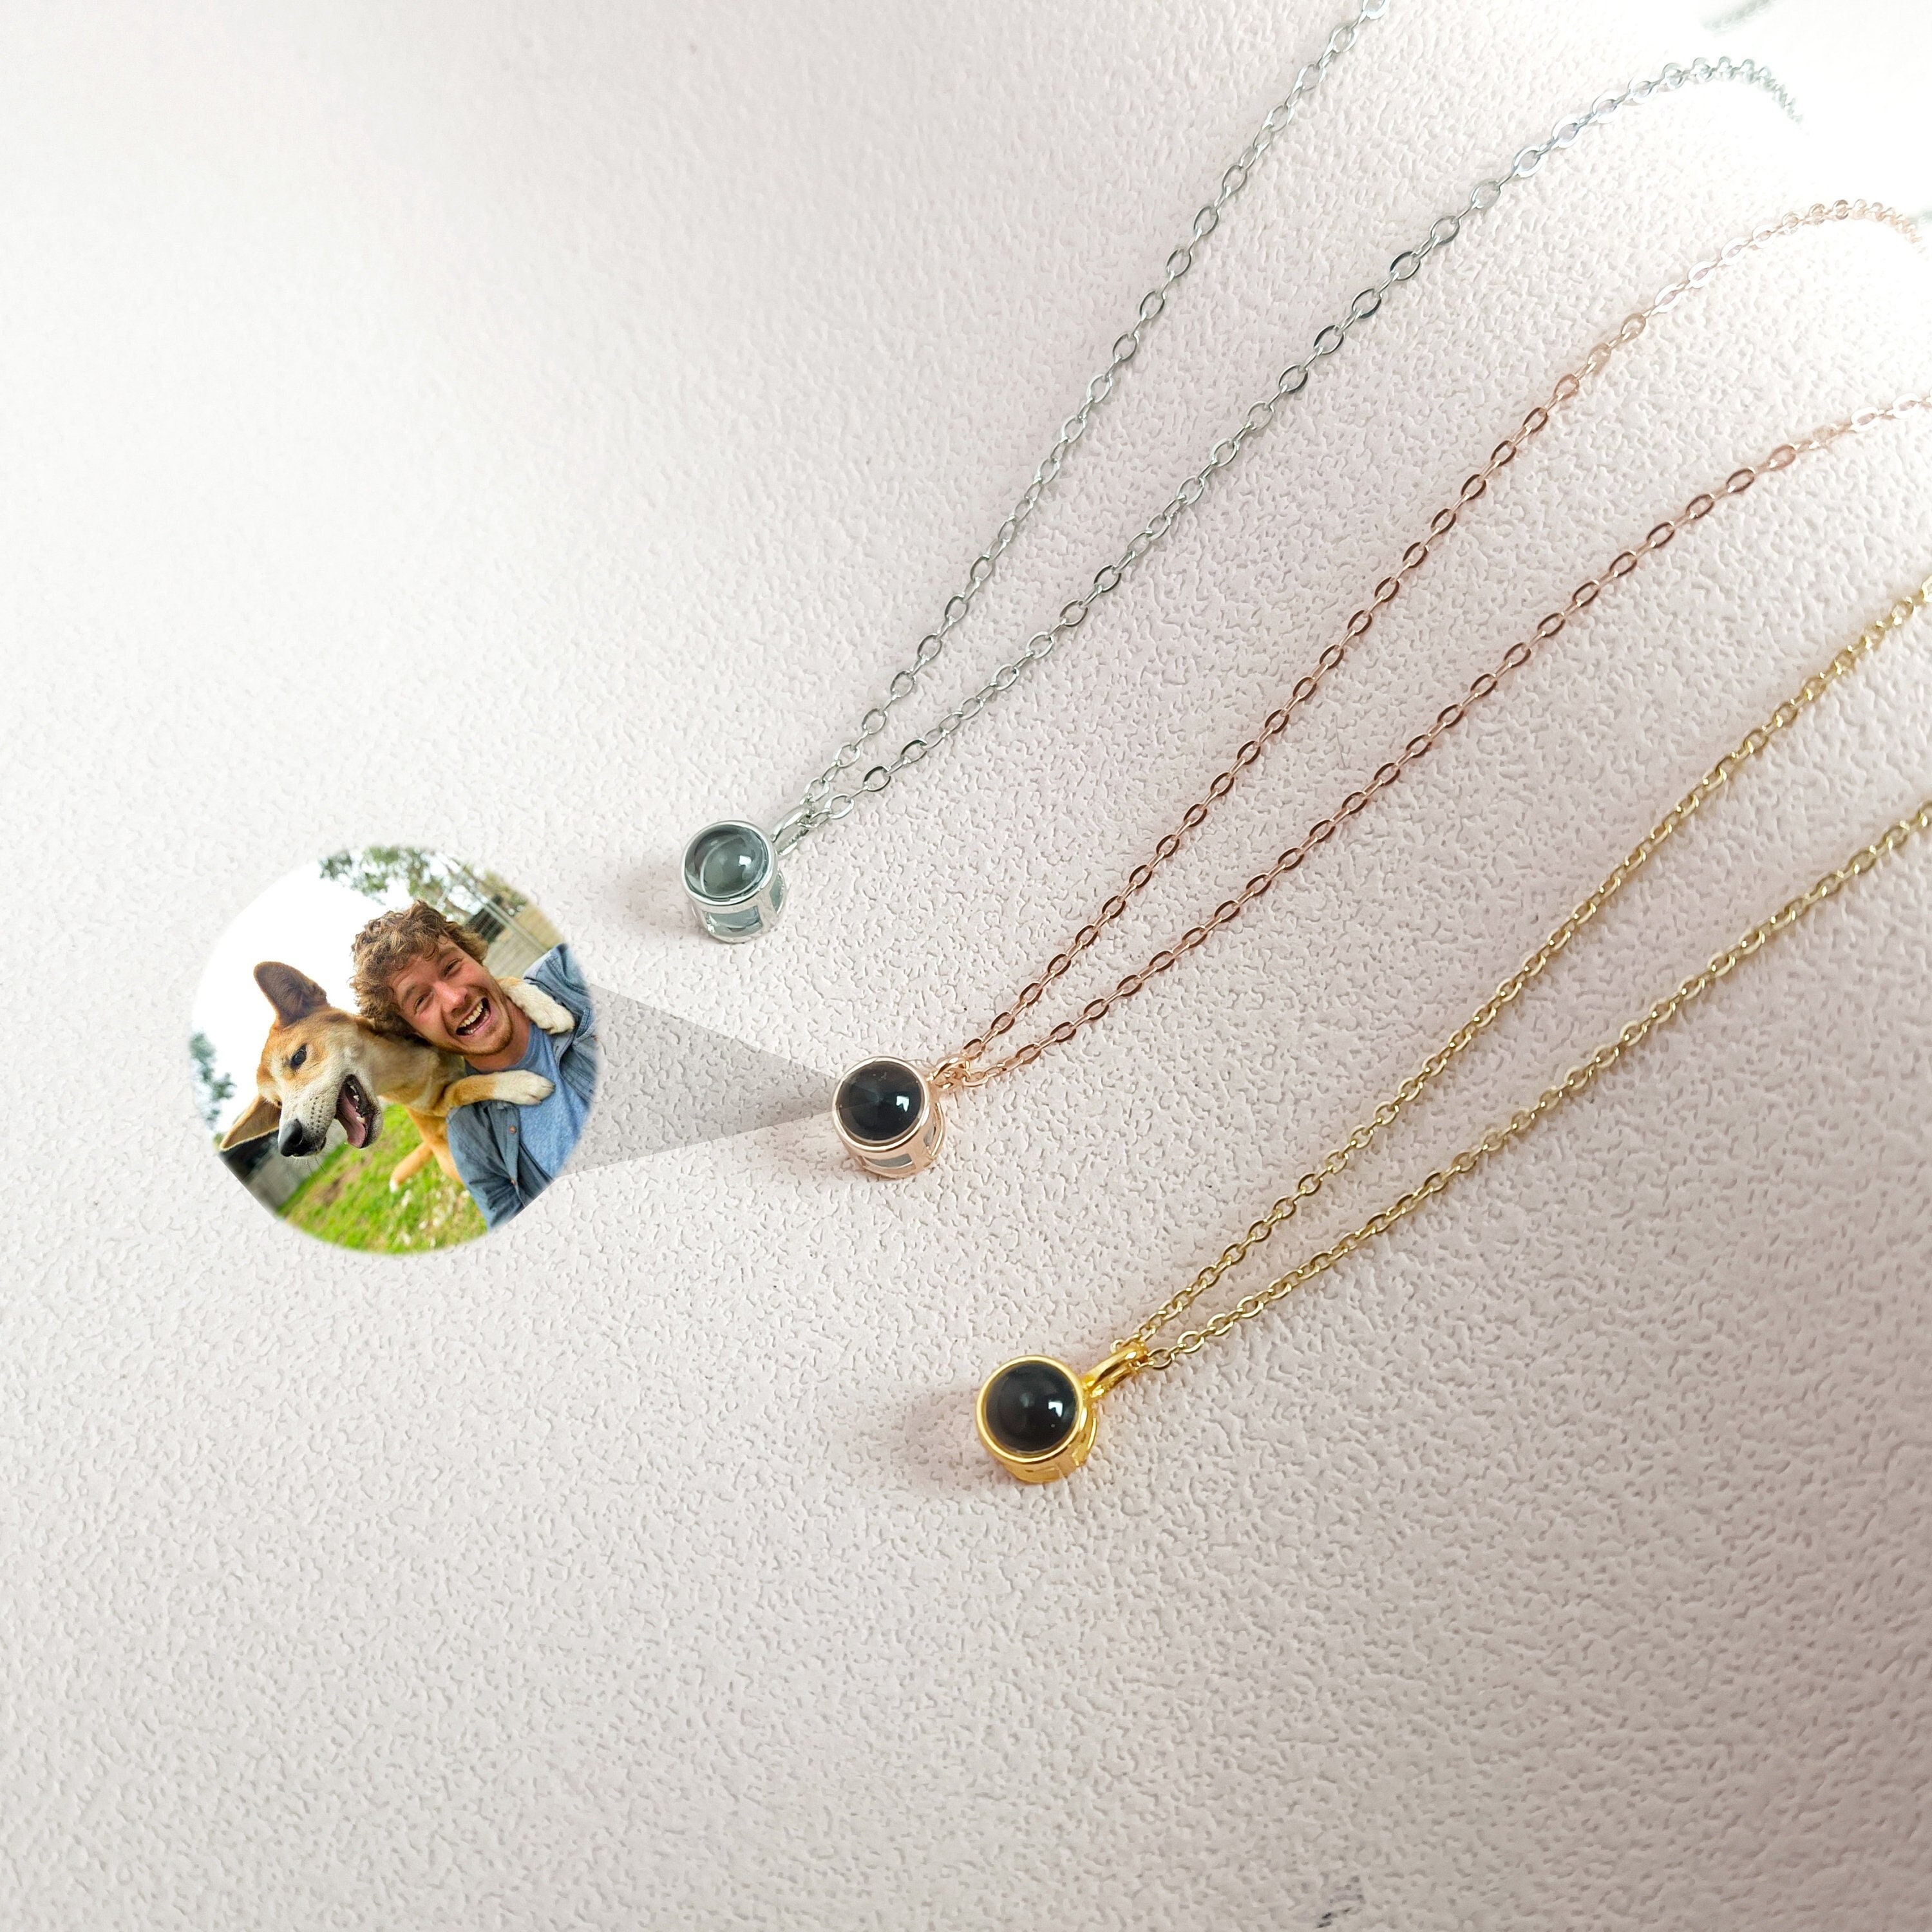 ArtStation - Buy a Necklace with Photo Projection Online in the UK